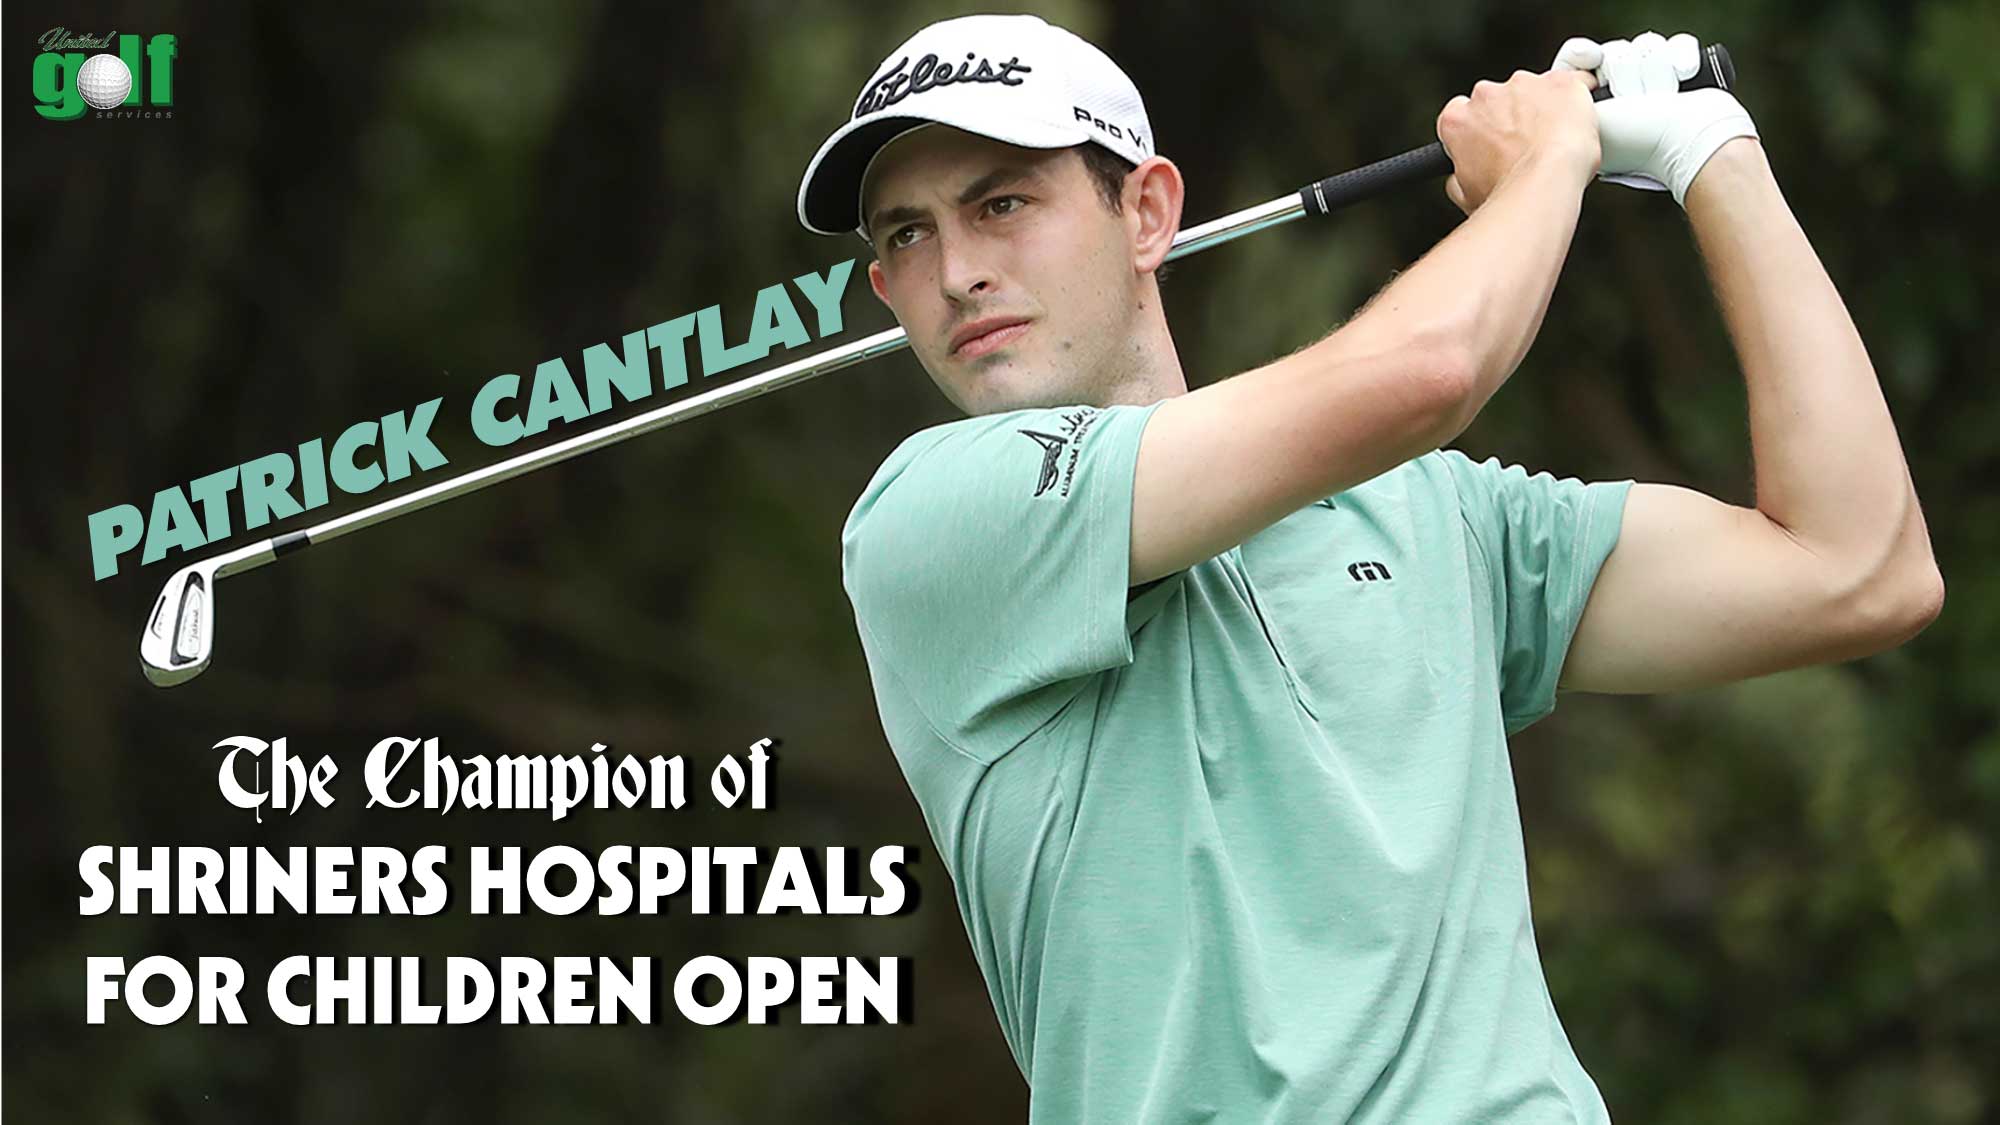 [TIPS] The Club Bag Bringing The First Pga Tour Title To Patrick Cantlay